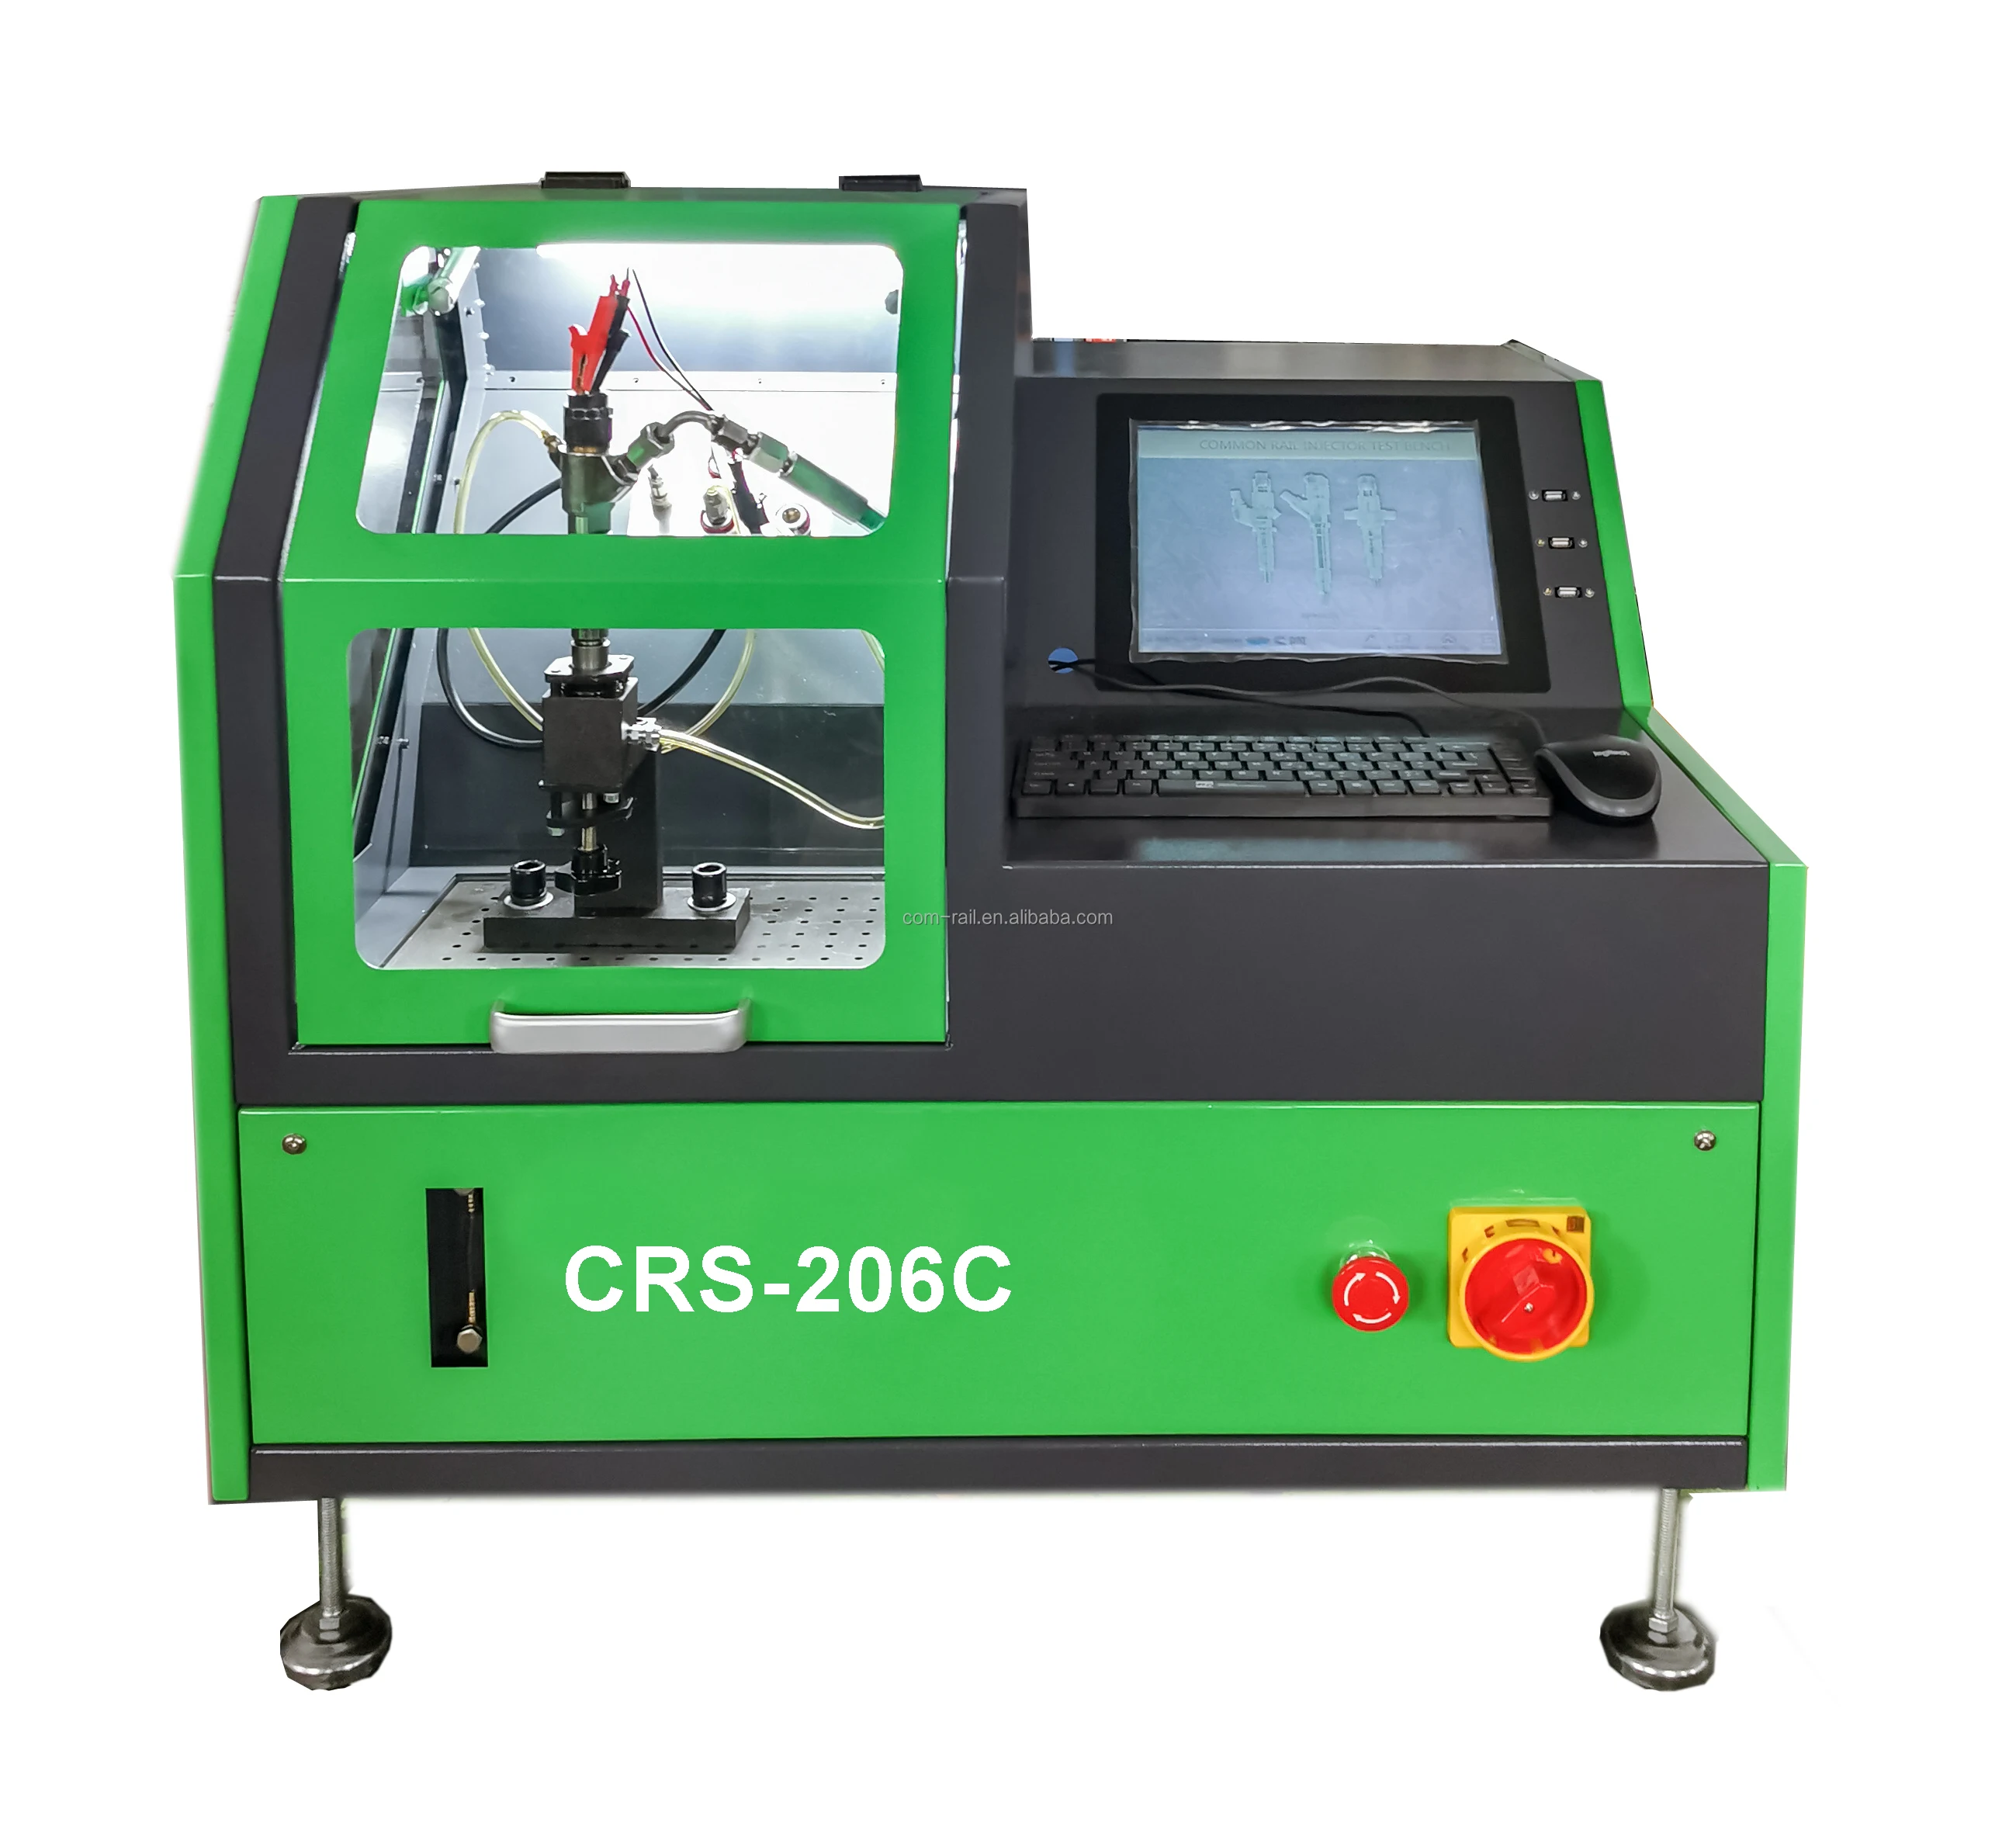 EPS205 Diesel Common Rail Injector Test Bench with The Cleaning Injectors Functions Injector Cleaner Machine CRS-206C Universal